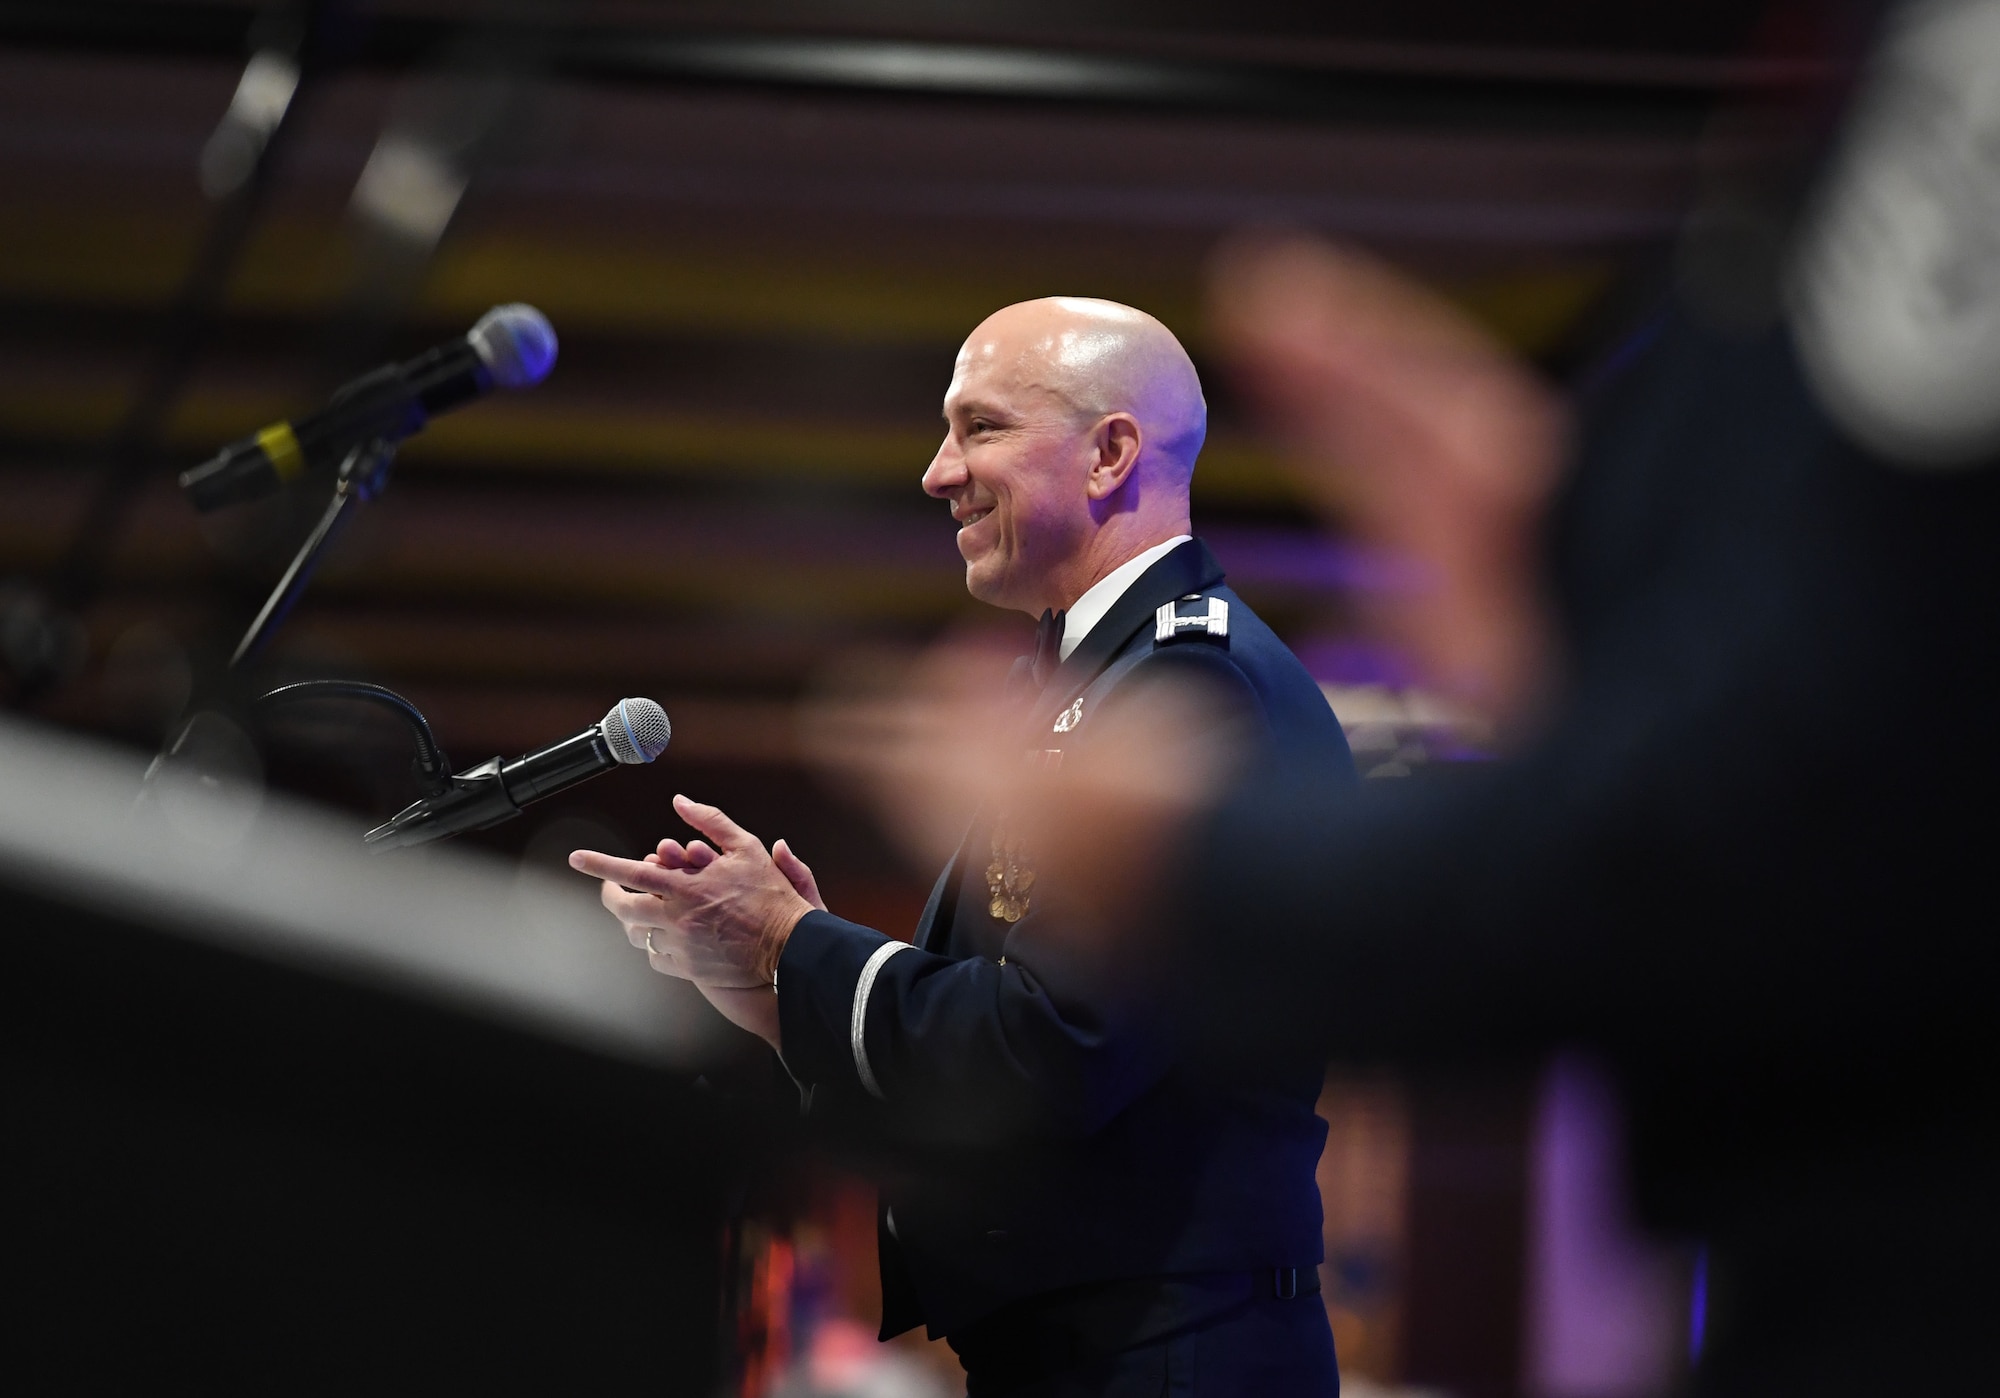 U.S. Air Force Col. William Hunter, 81st Training Wing commander, delivers remarks during the Keesler Air Force Ball inside the IP Casino Resort Spa at Biloxi, Mississippi, Sept. 17, 2022. The event, which celebrated the Air Force's 75th birthday, also included a cake cutting ceremony. (U.S. Air Force photo by Kemberly Groue)